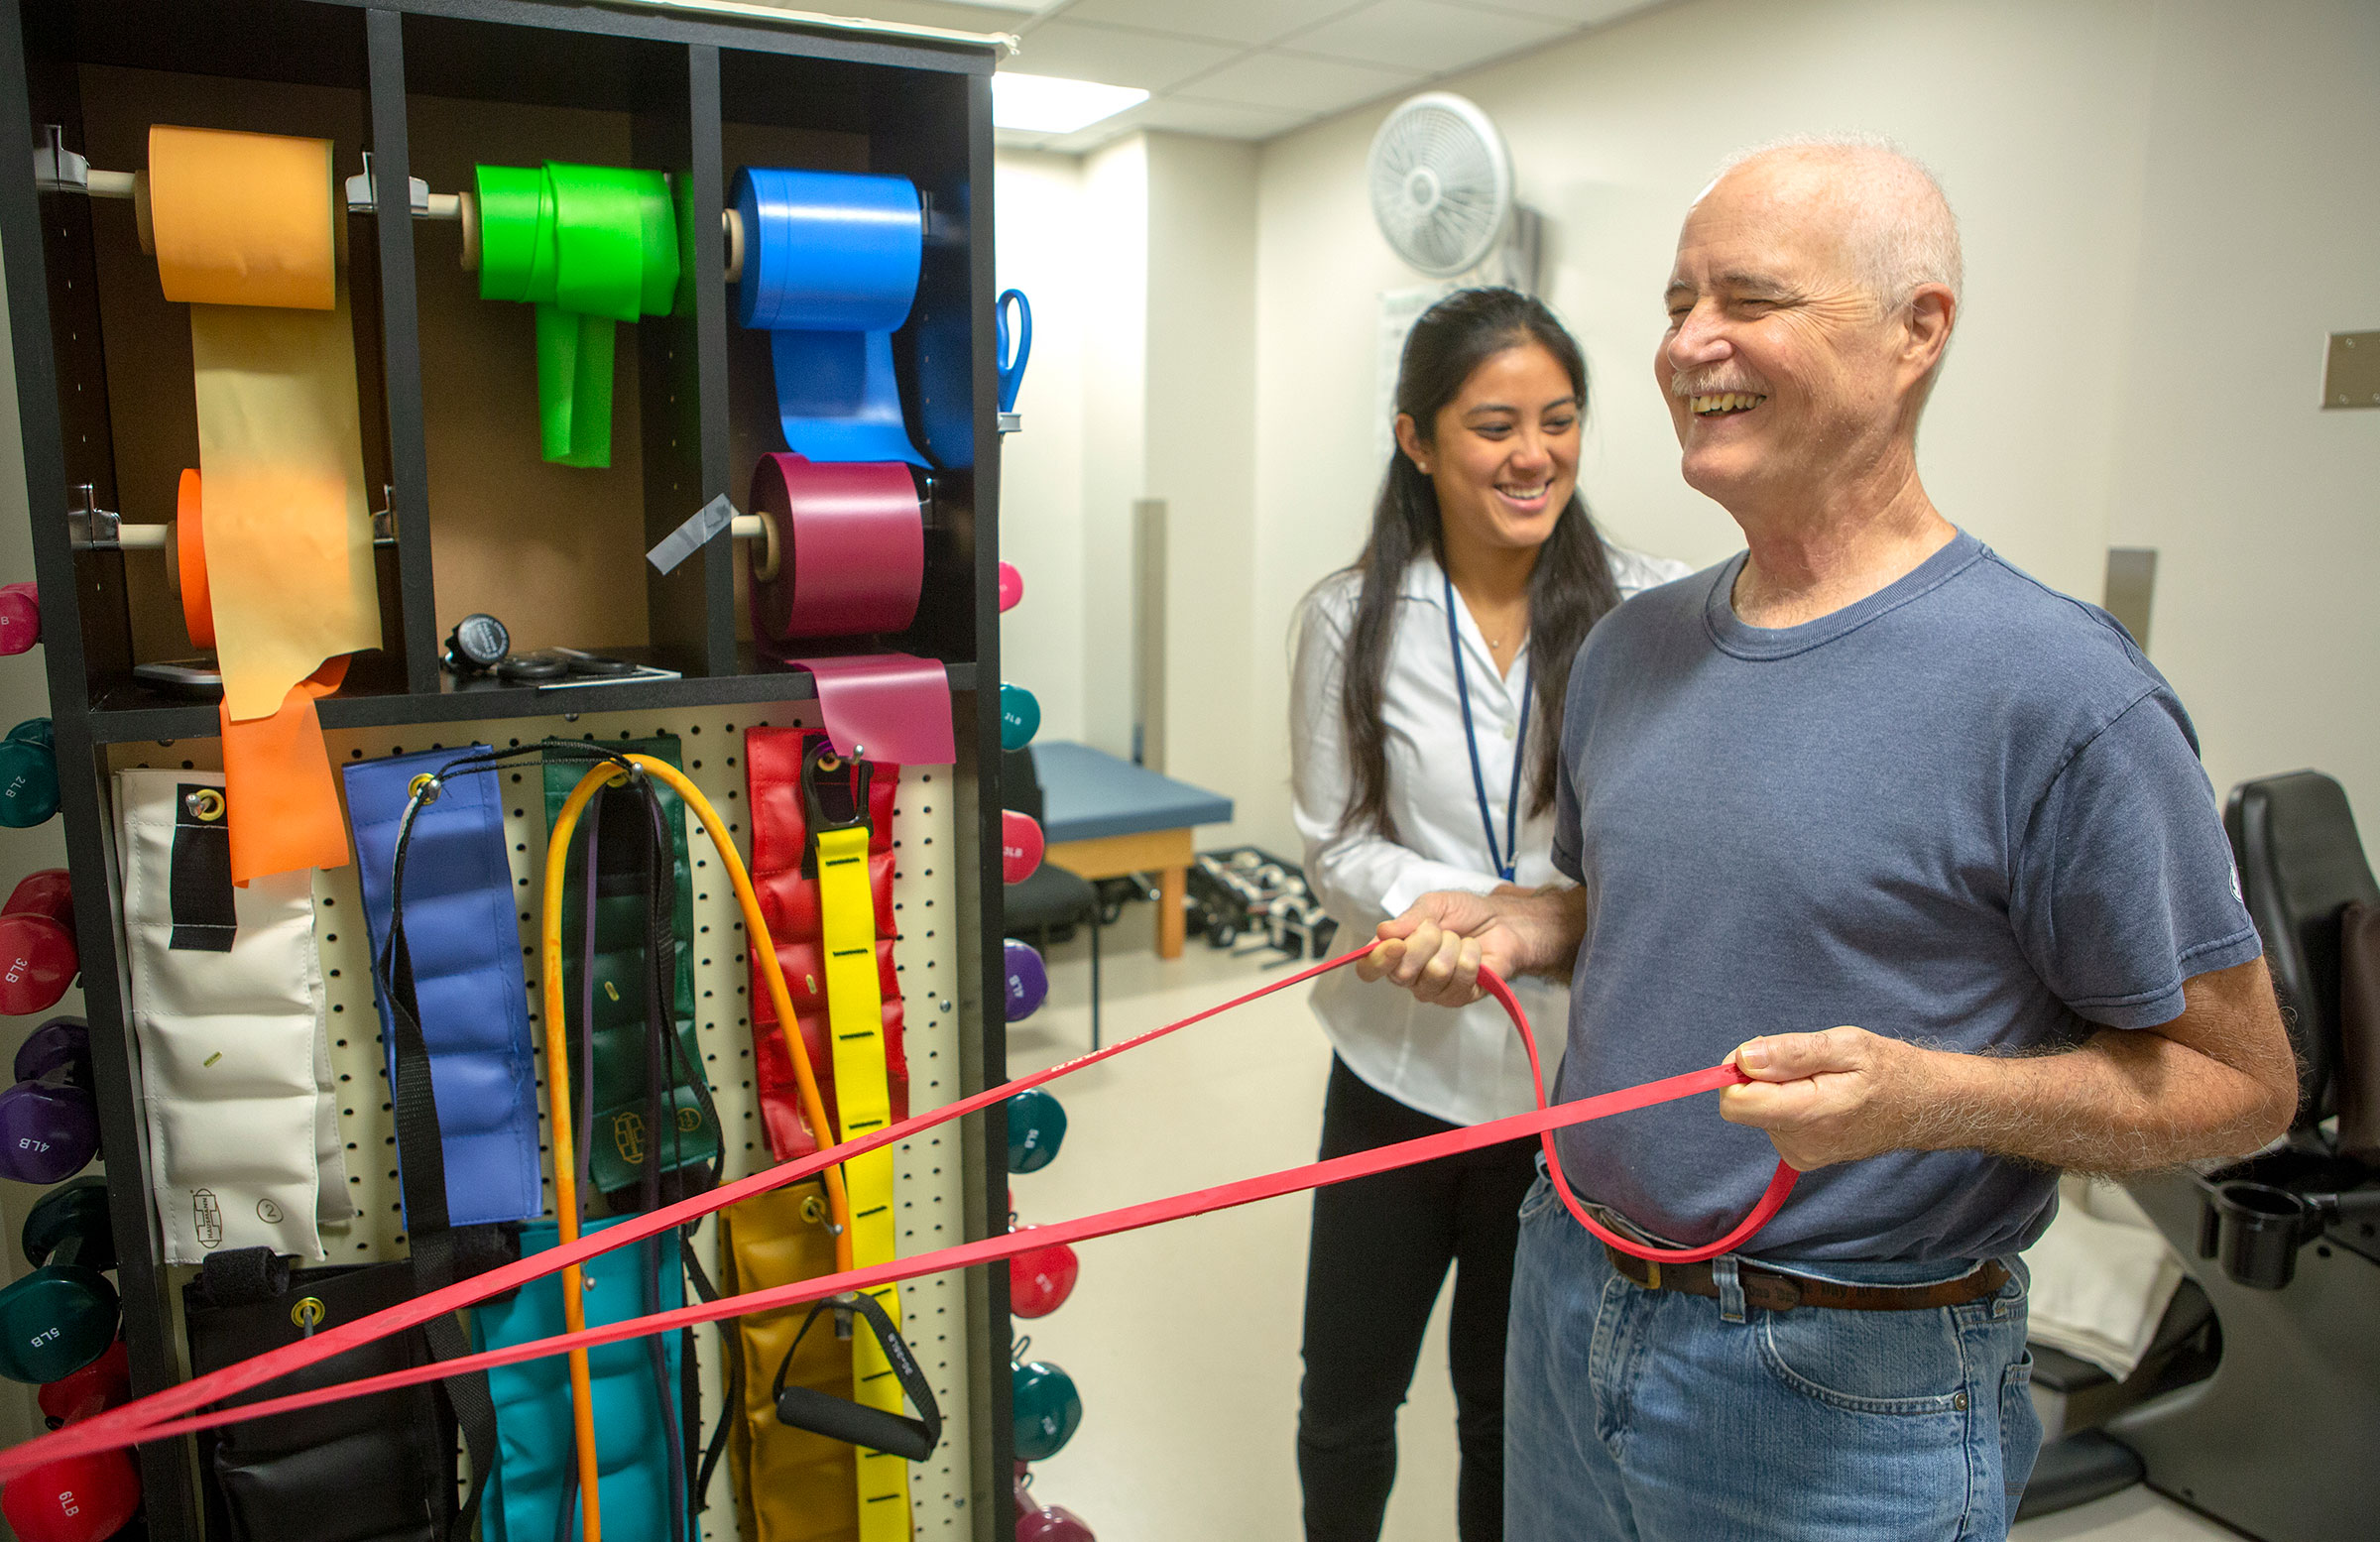 Melanie Potiaumpai, PhD, a postdoctoral scholar with The ONE Group, works with cancer patient Curt Chambers in the exercise room at Penn State Cancer Institute in 2018. Both are smiling and Chambers is pulling on a resistance band.